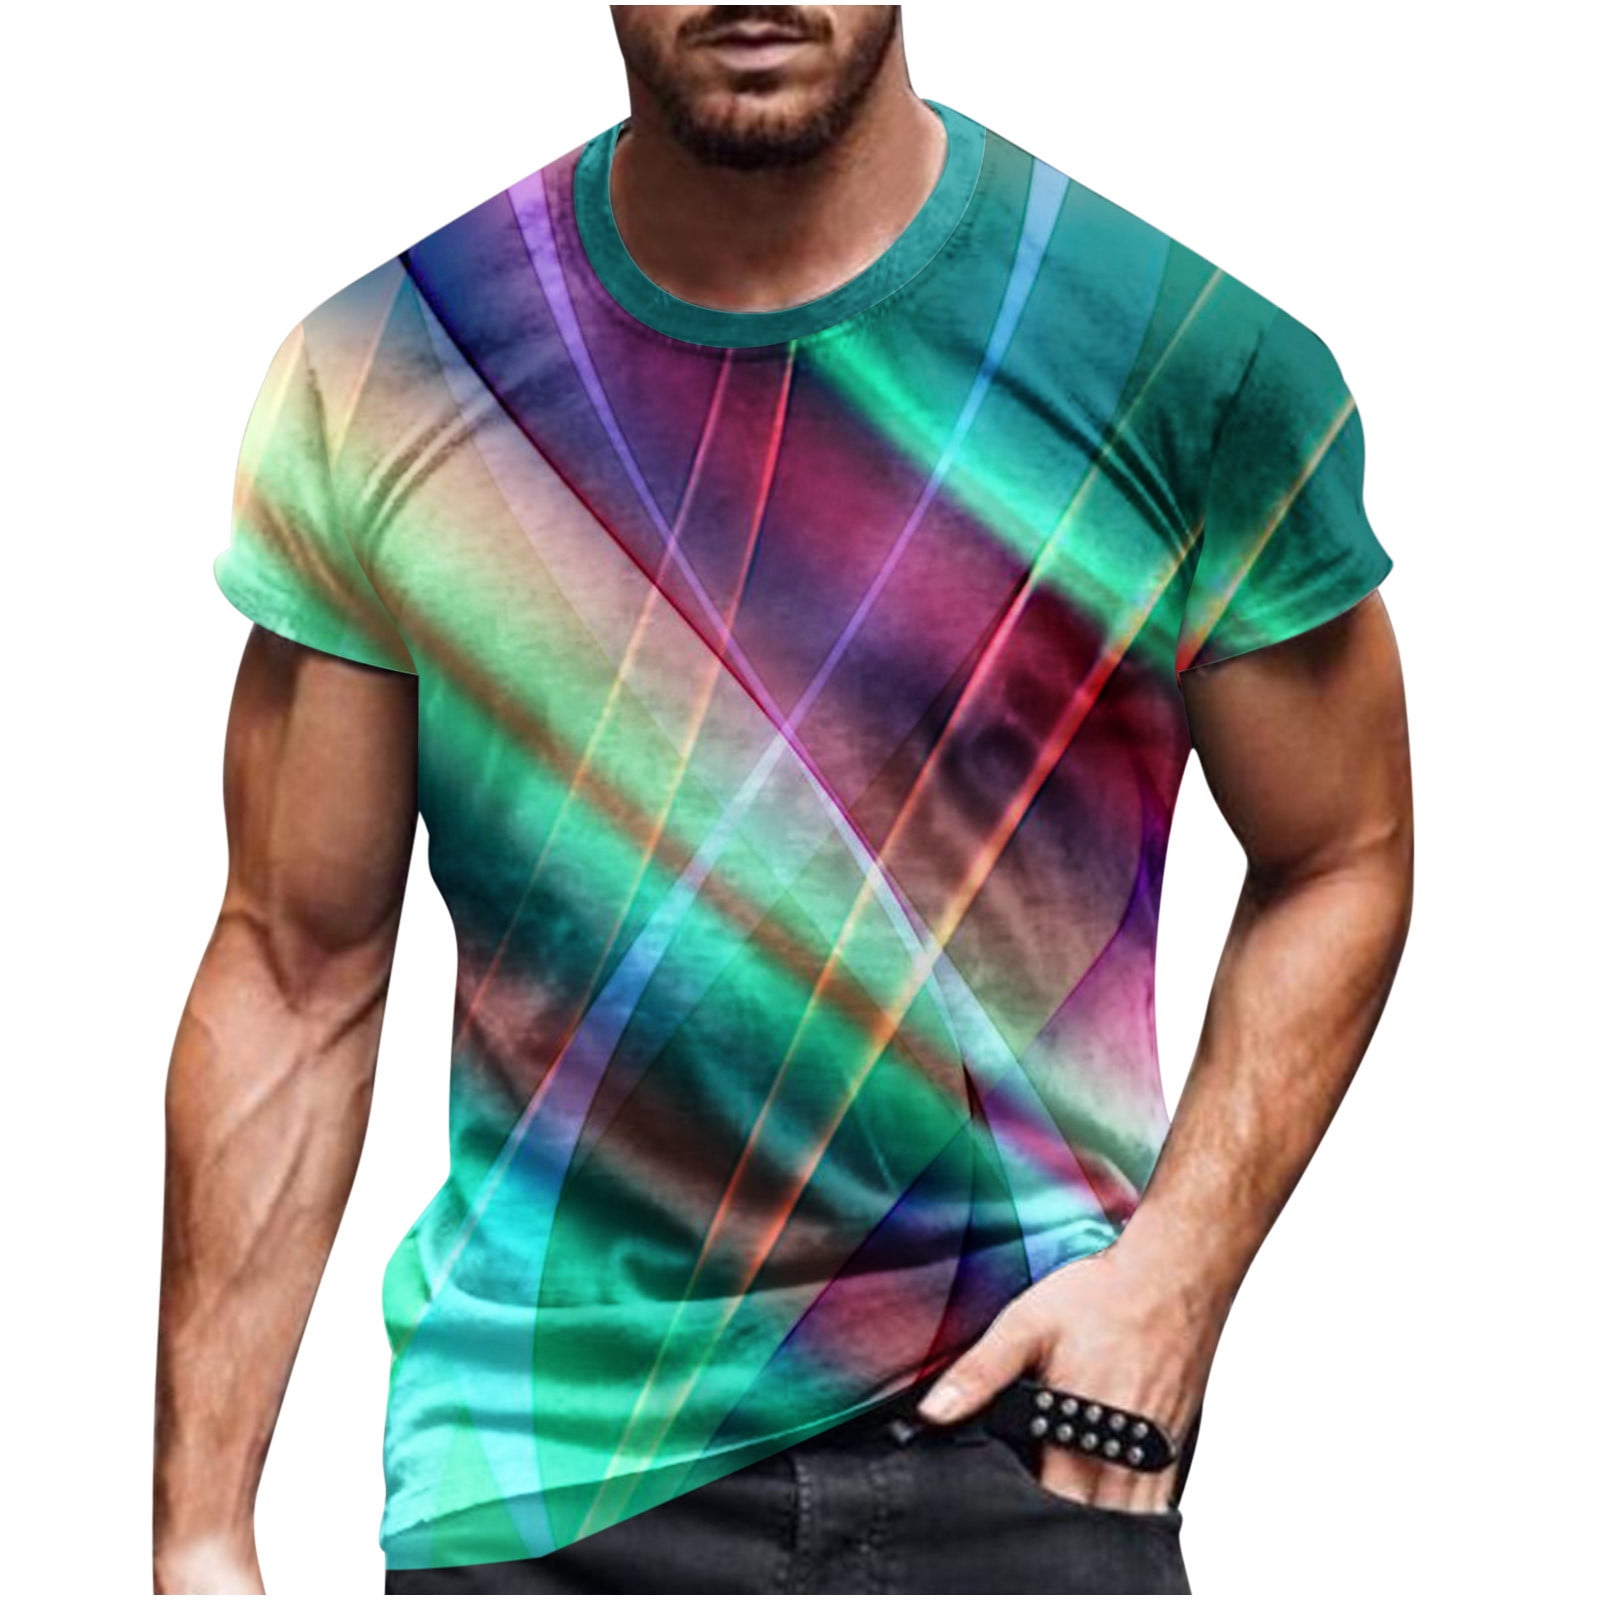 YYDGH Men's 3D Printing T-Shirt Colorful Novelty Graphic Short Sleeve  Crewneck Tee Tops Casual Slim Fit T Shirts(2#Green,5XL)